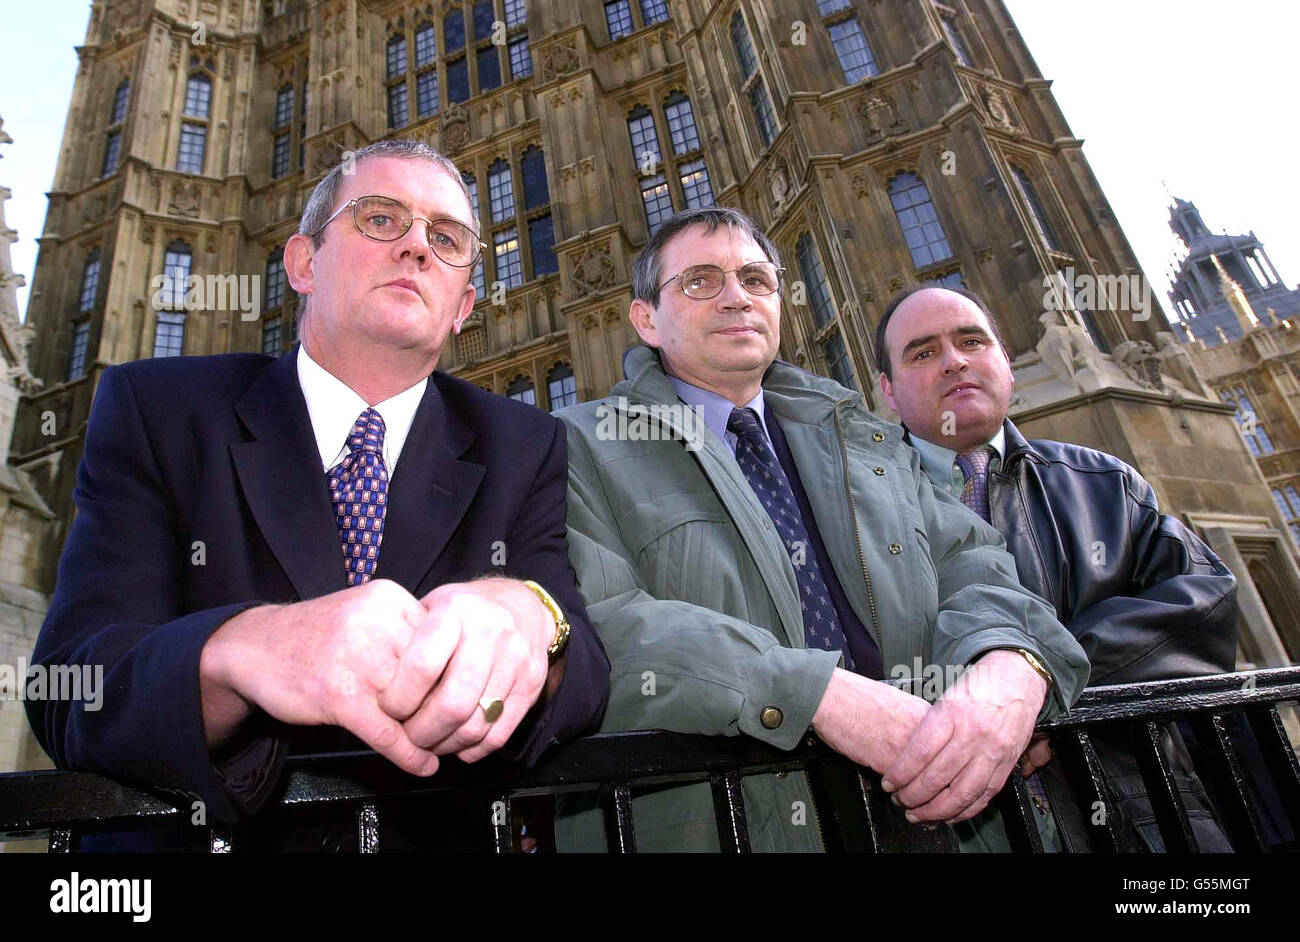 From left to right; Allan Curran, Frank Carrigan and J McFall from the GMB Union represntatives outside the House of Commons in London. British shipyards are set to win lucrative new orders to build vessels for the Ministry of Defence. *... safeguarding thousands of jobs. Belfast's troubled Harland and Wolff was expected to win an order for two new roll-on roll-off ferries. The Govan yard on the Clyde in Glasgow, Swan Hunter on Tyneside and Appledore in Devon are also tipped to win work on new MoD landing ships. Stock Photo